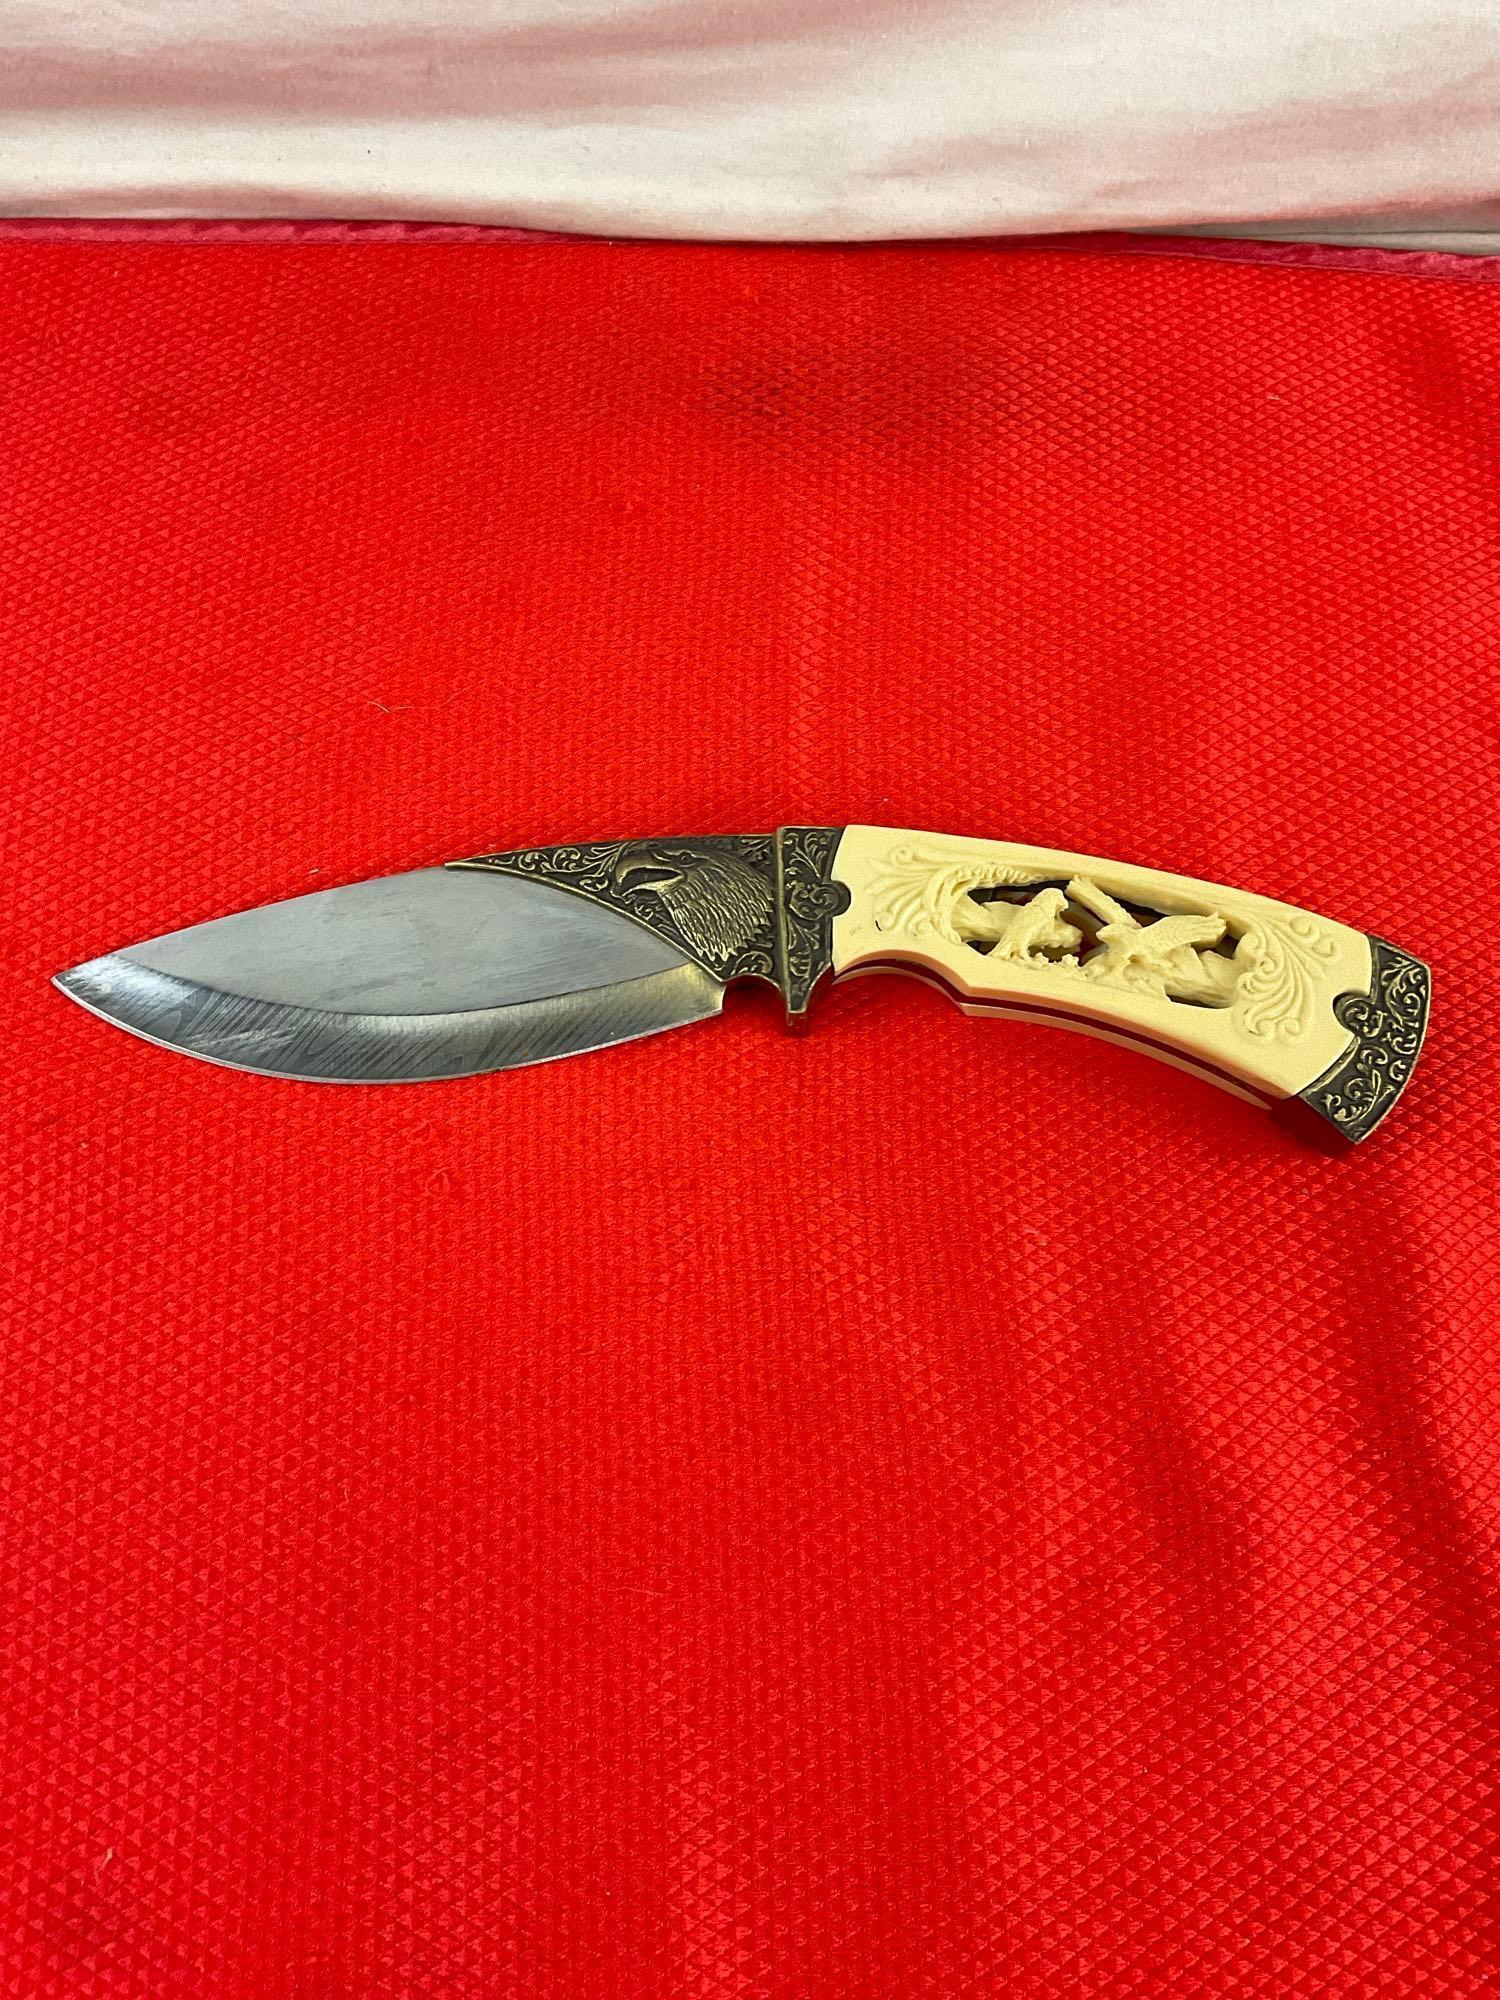 Stainless Steel Fixed Blade Knife w/ Double Eagle Carved Resin Handle & Etched Blade. See pics.